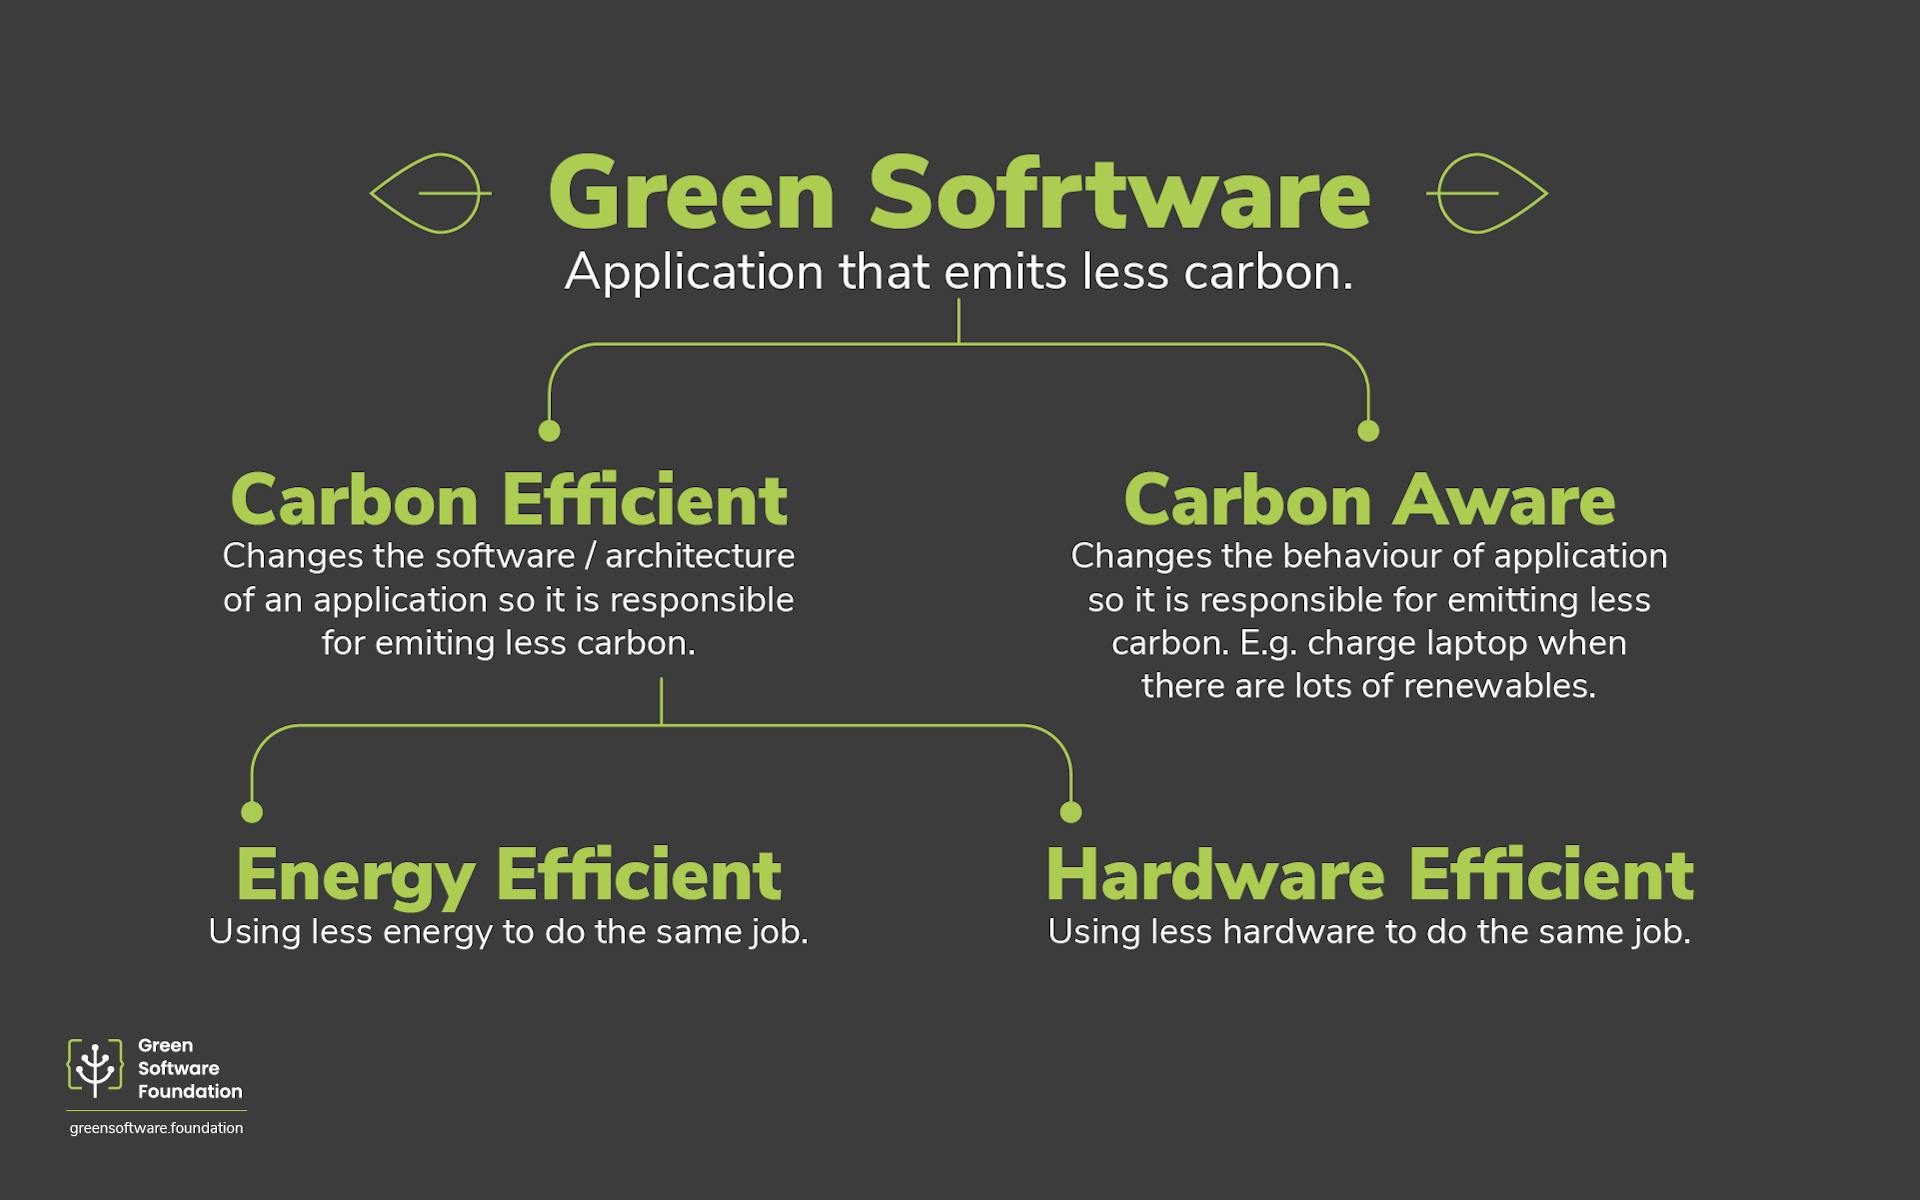 Illustration depicting The Green Software Foundation’s definition of Green Software